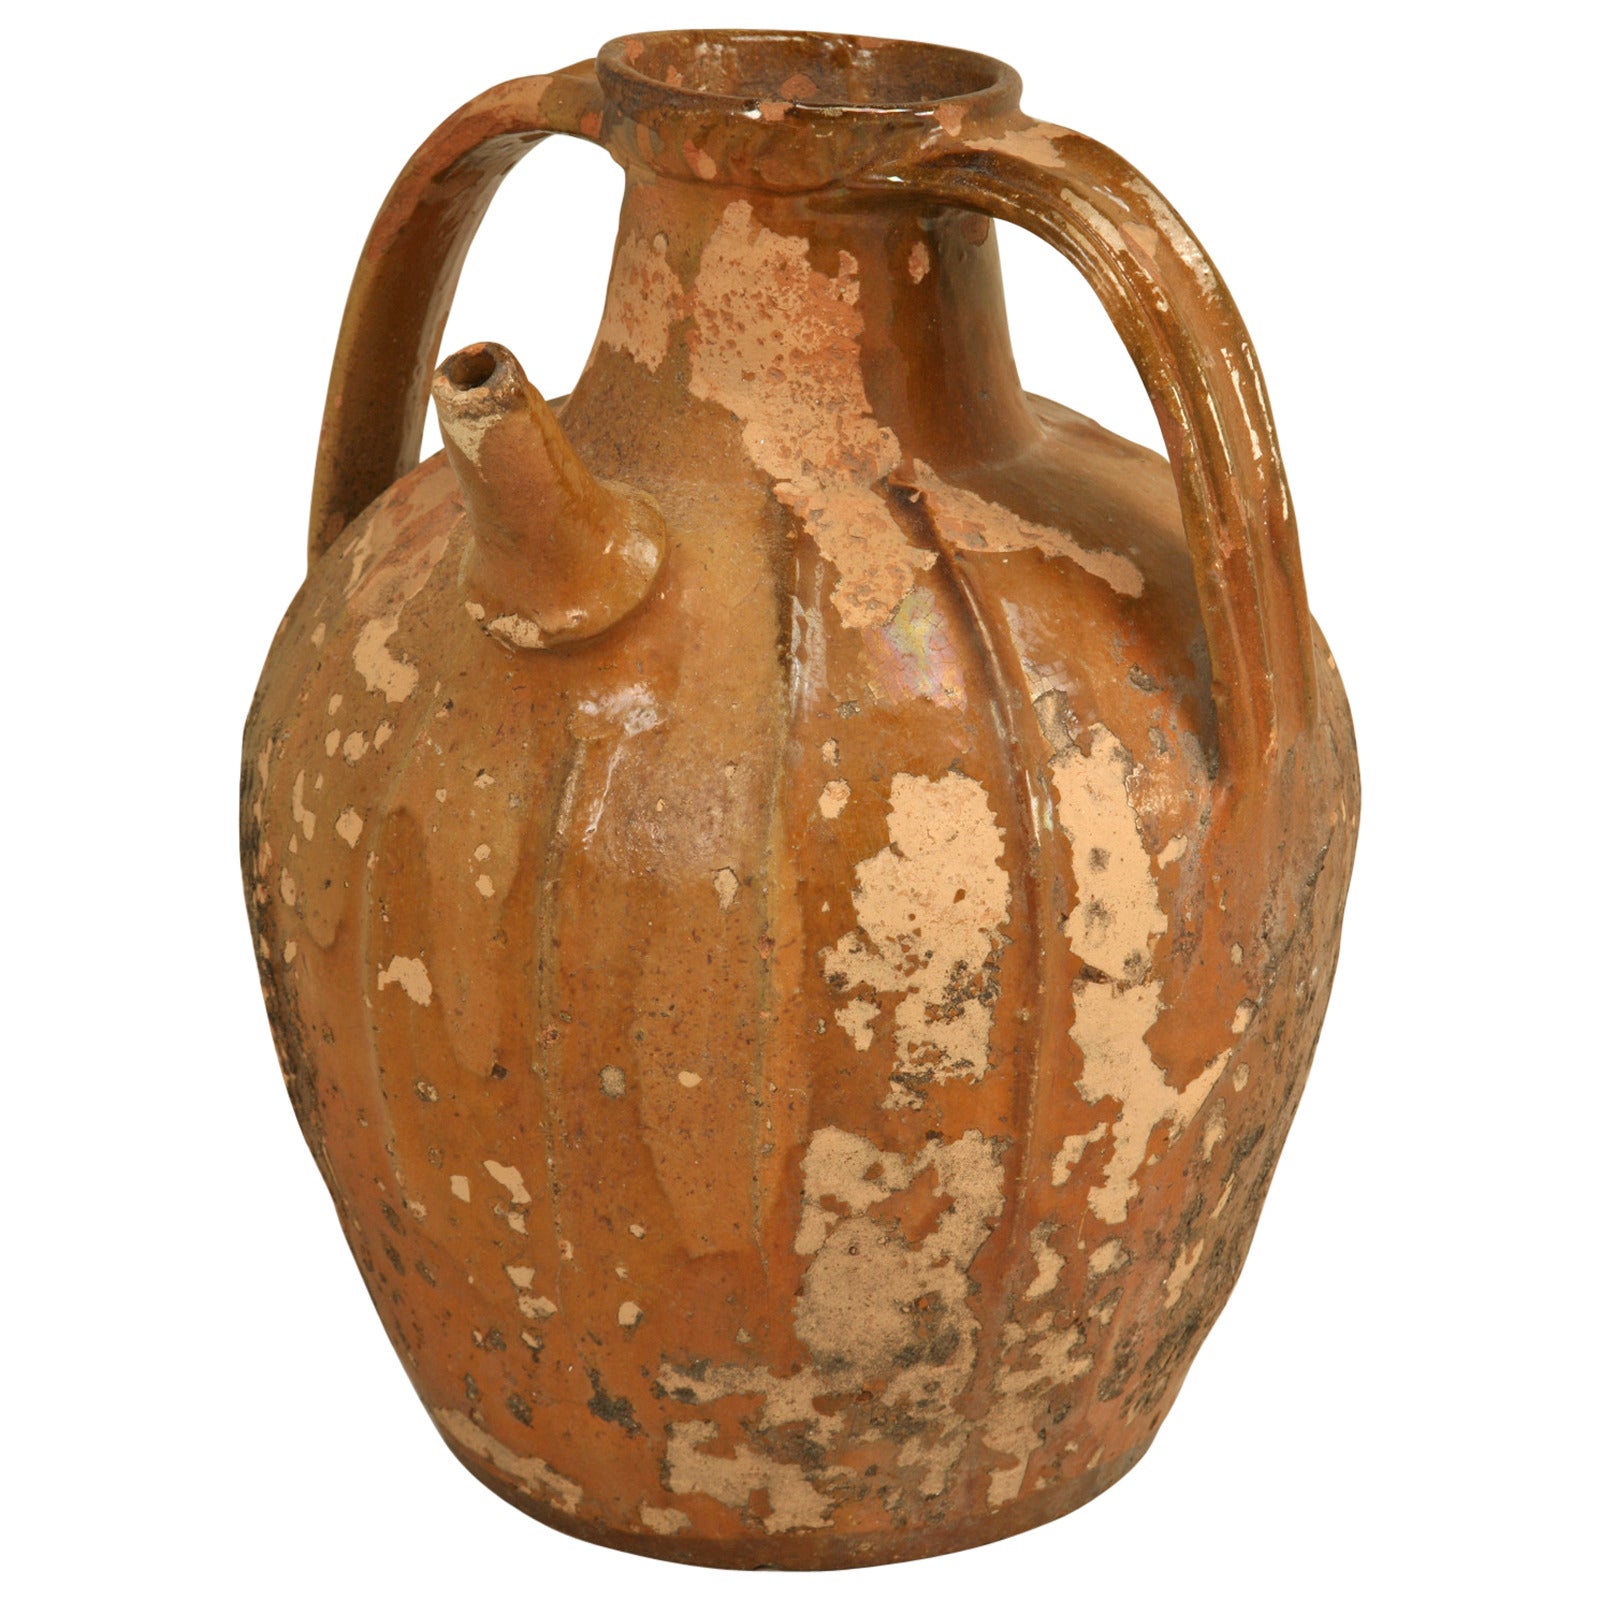 Antique French Pottery Water Jug, circa 1800s